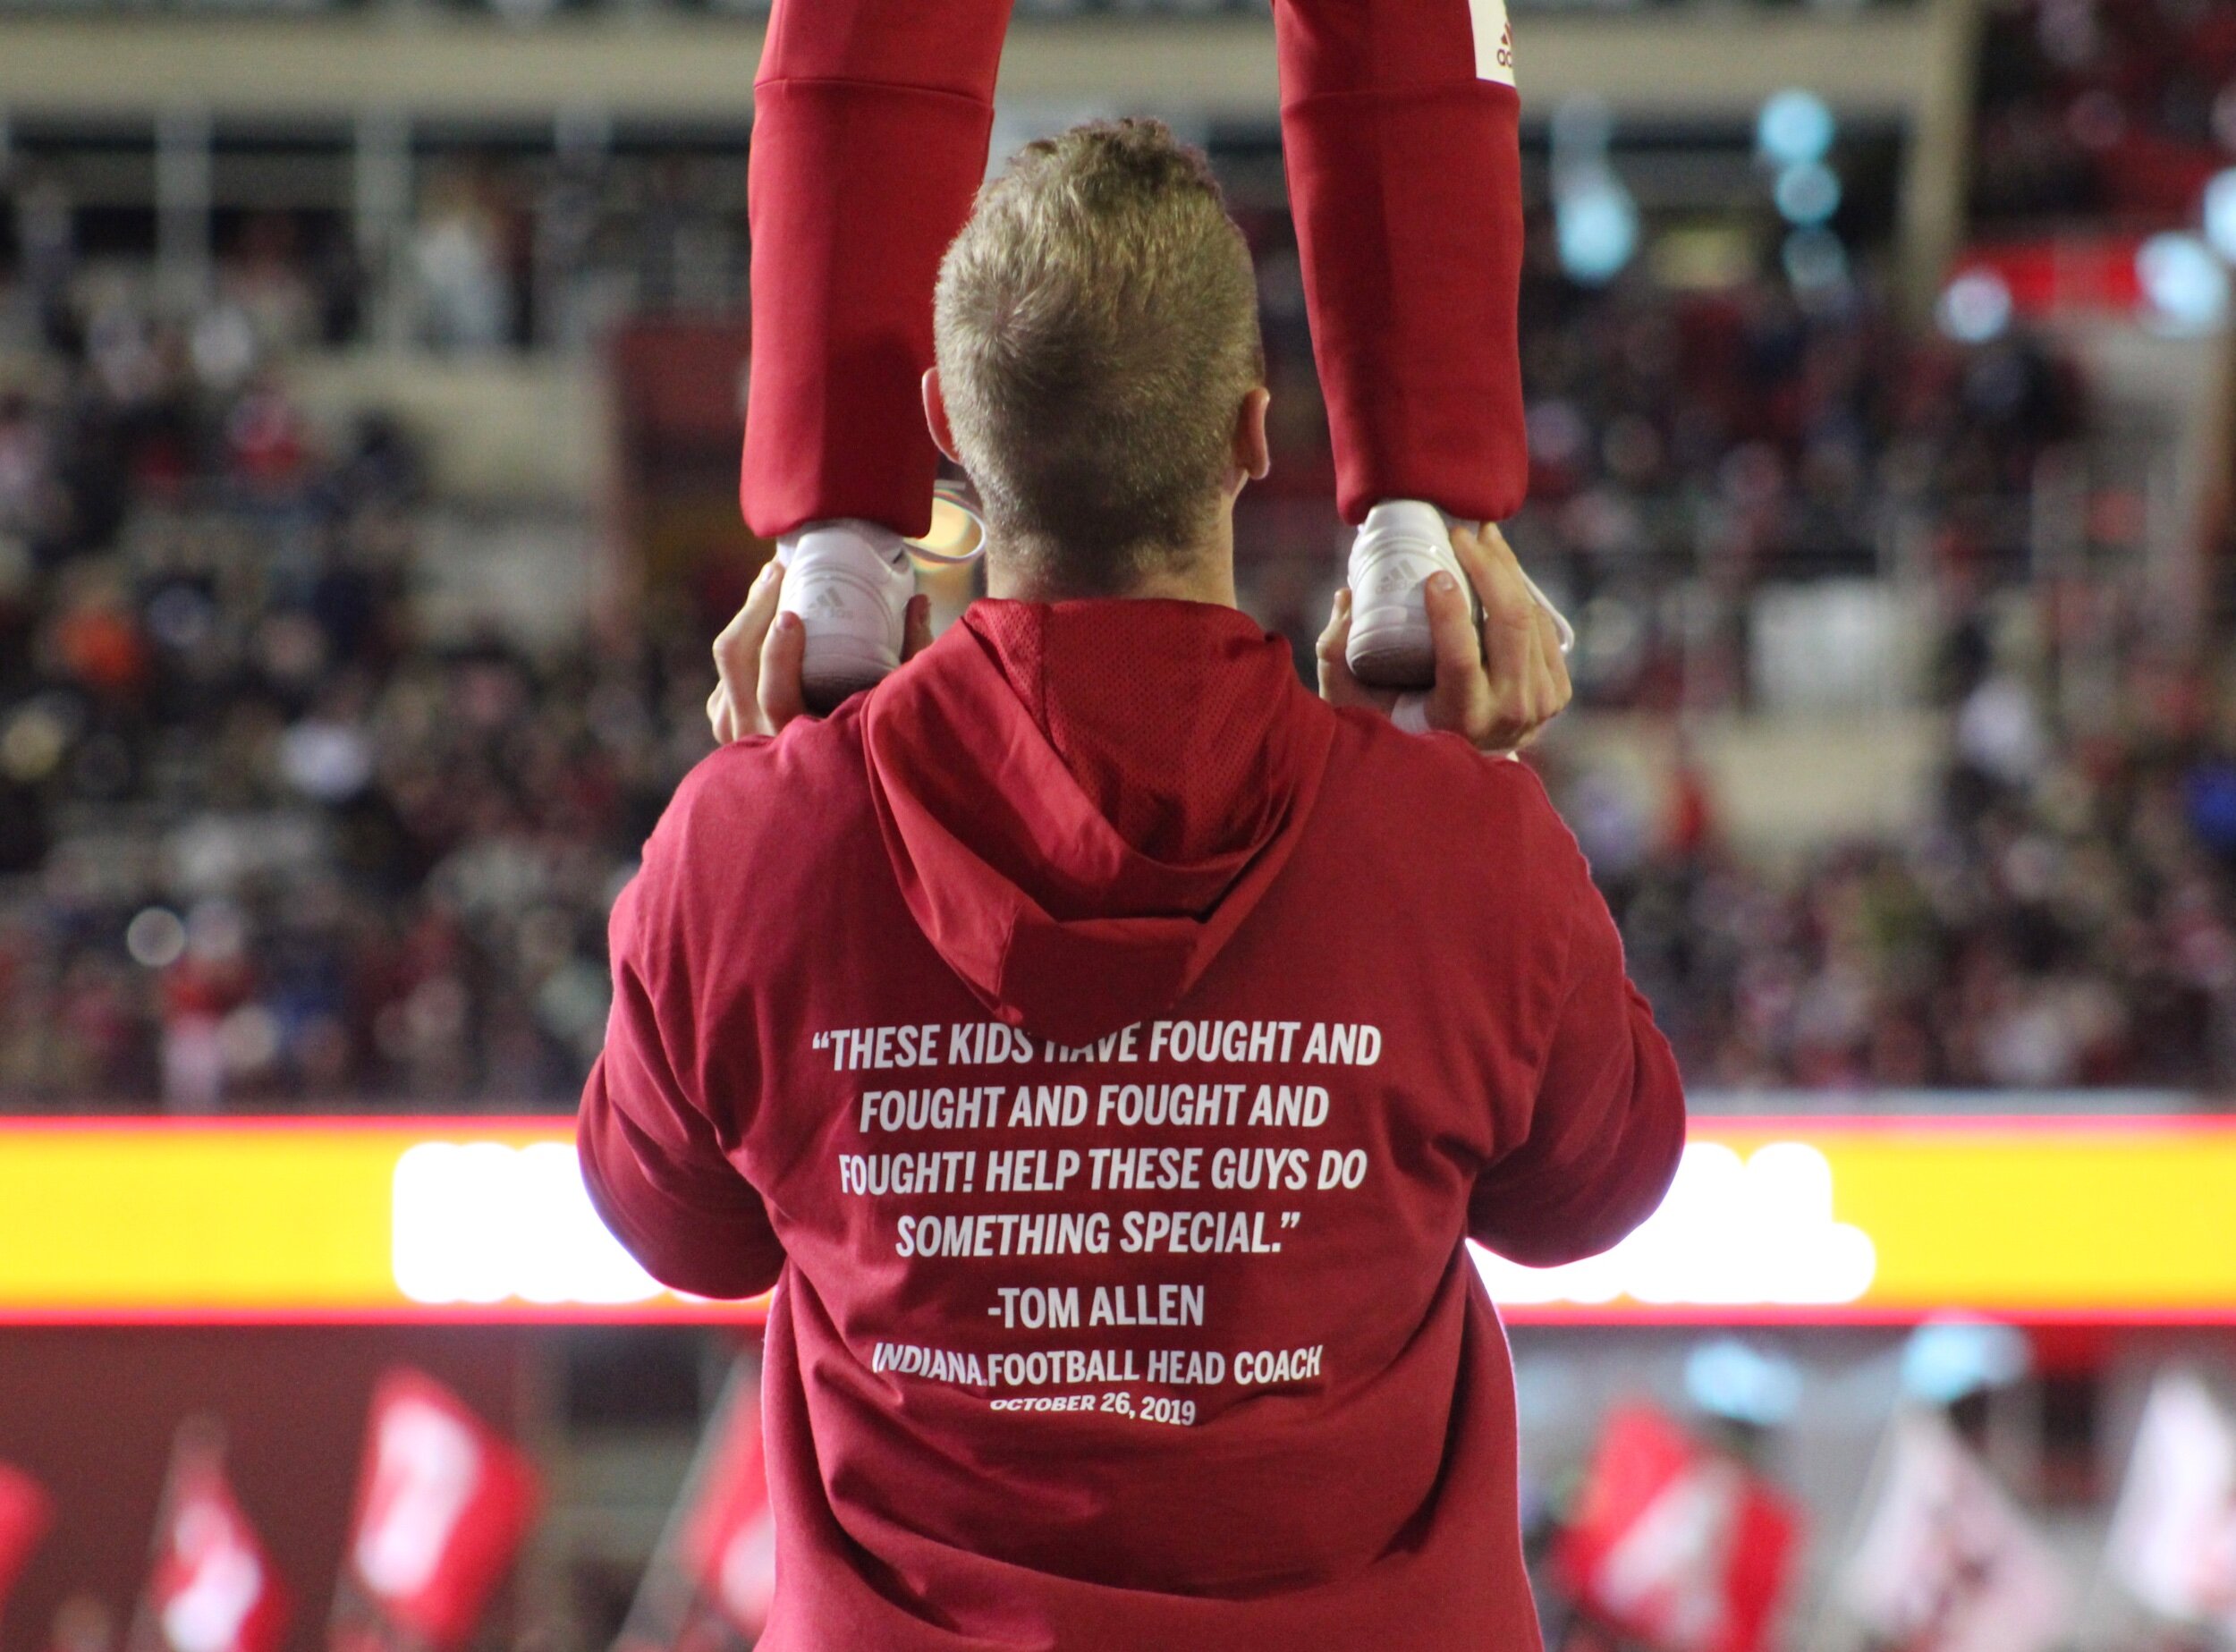  Indiana’s Student Athletic Board distributes shirts to the student section and cheerleaders in their home game versus Northwestern— following big road wins at Maryland and Nebraska that earned them their first October bowl bid since 1994. 